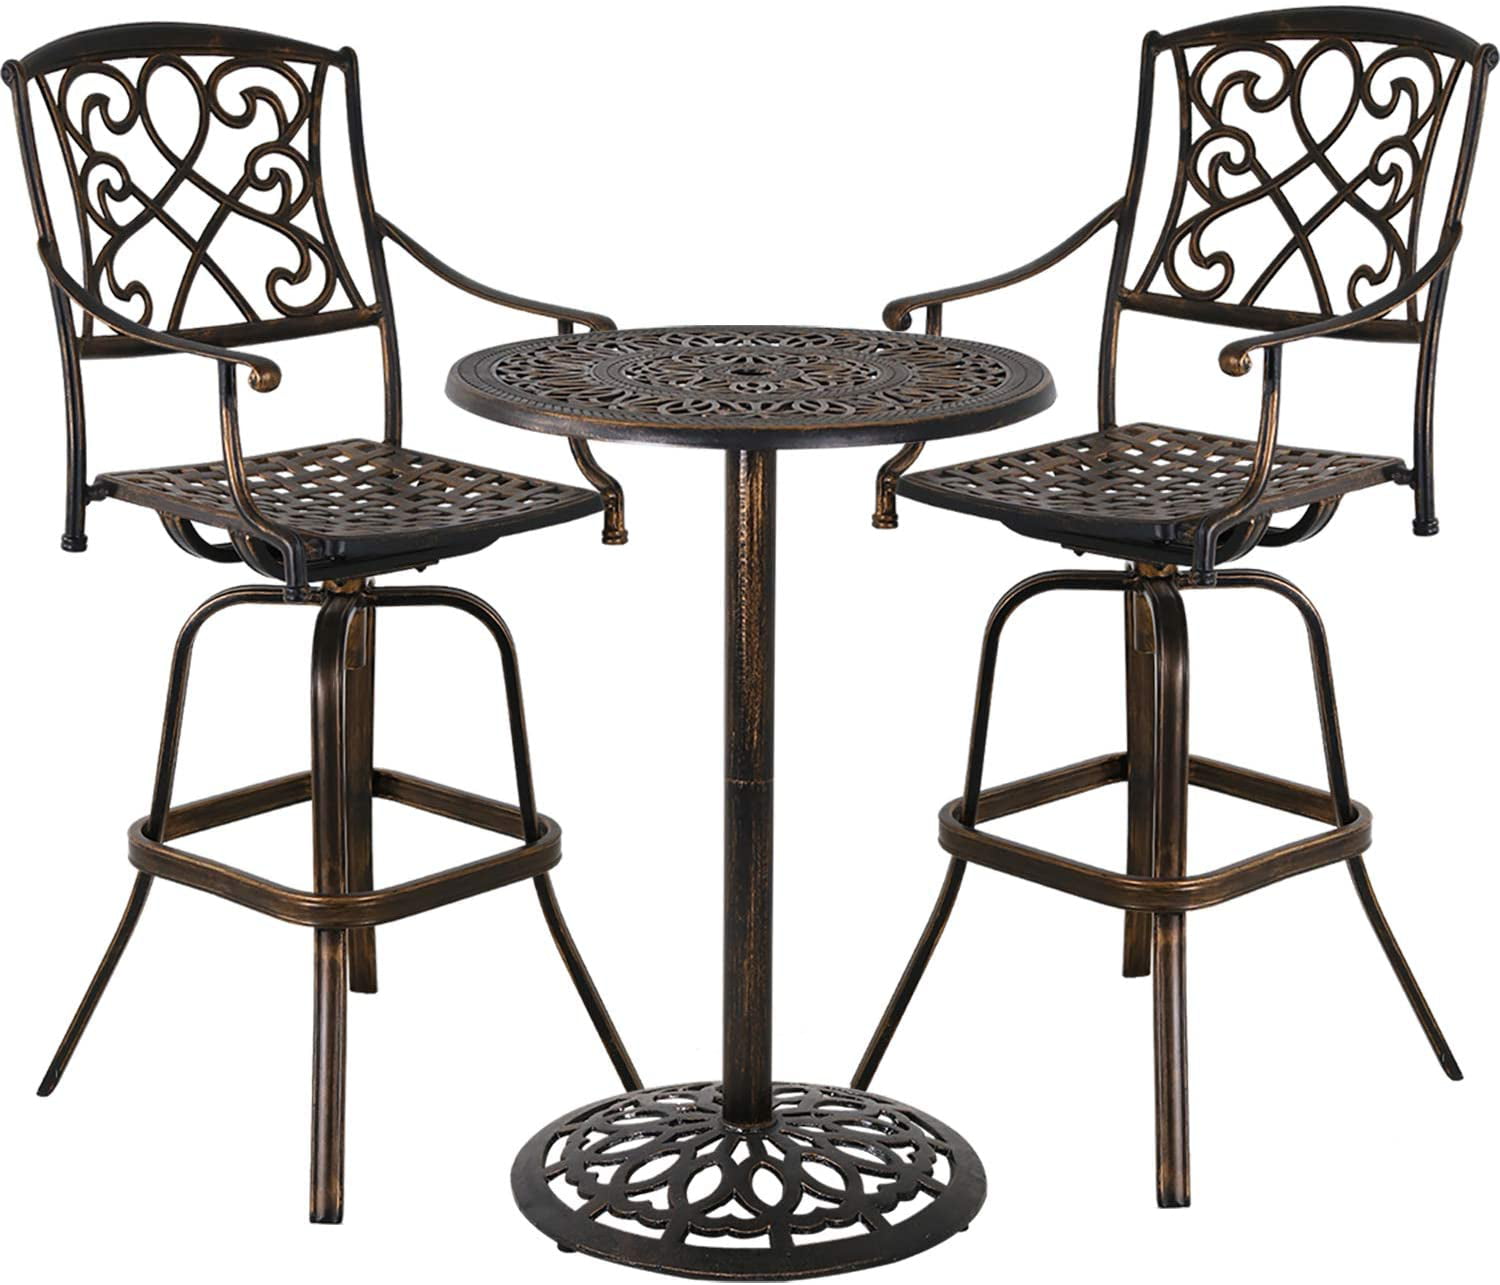 Bar Table And Stool Outdoor, Patio Bar Bistro Table